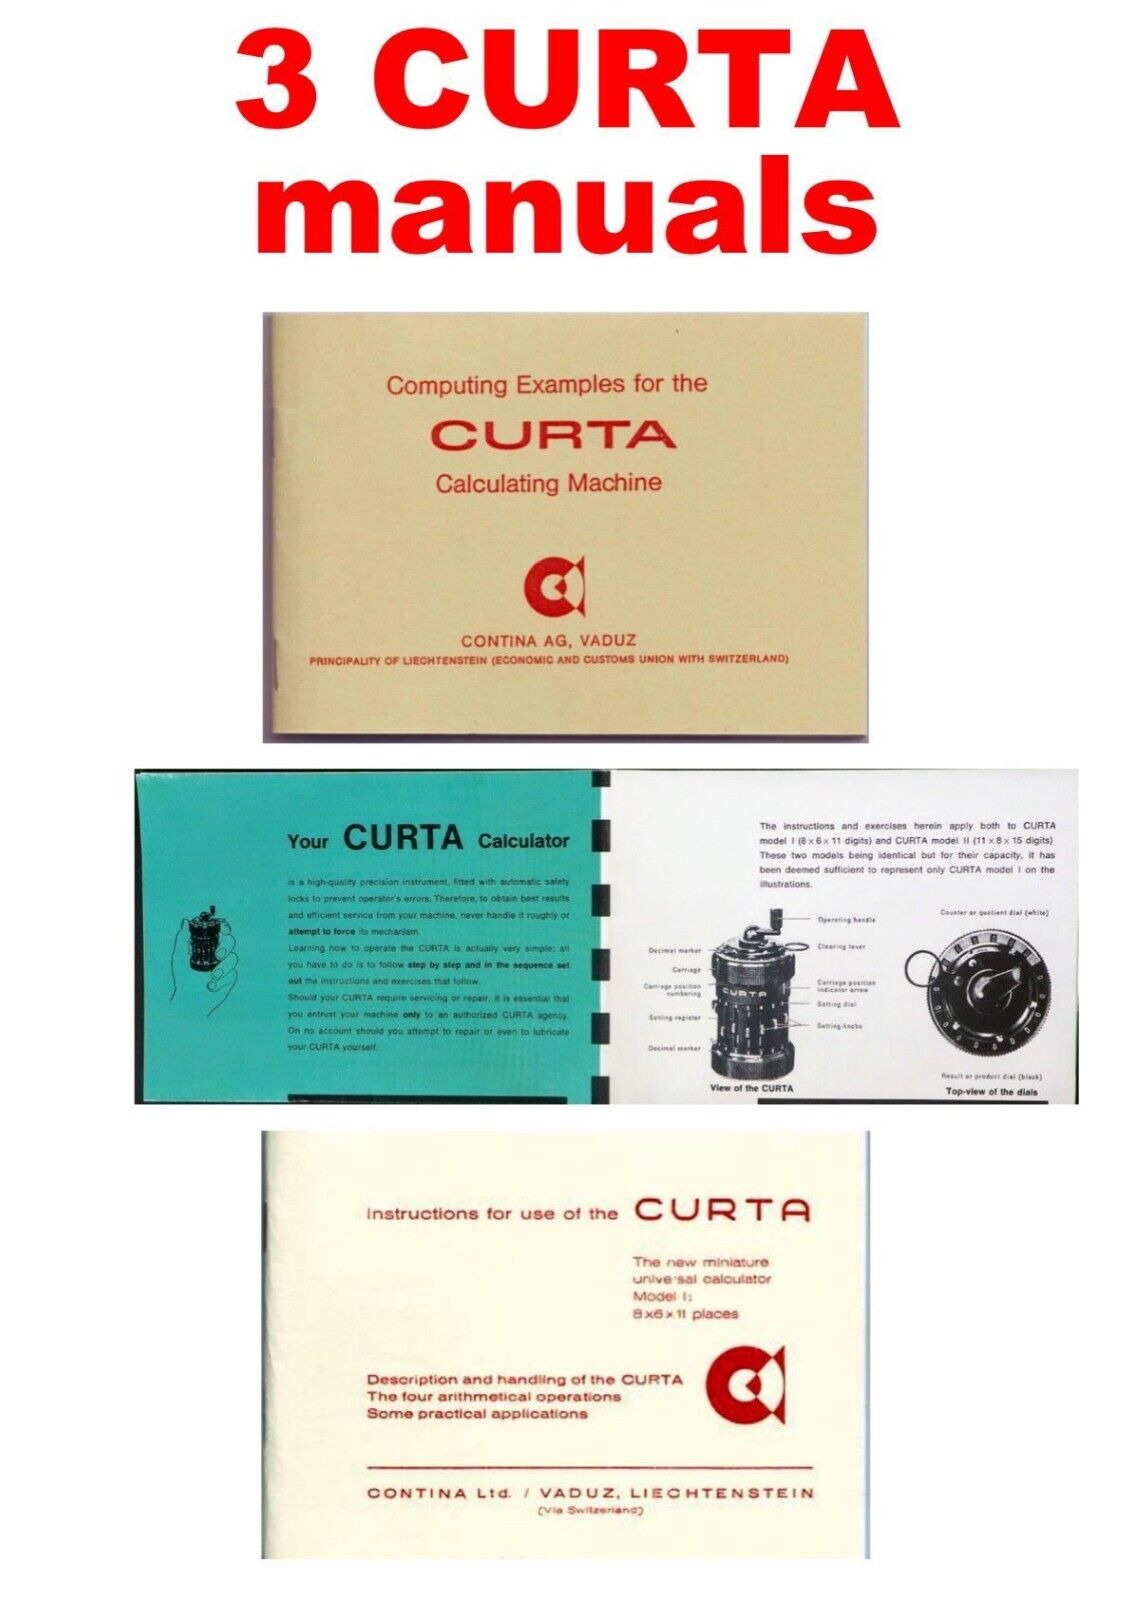 Curta Calculator manuals (package deal of 3 different prints)